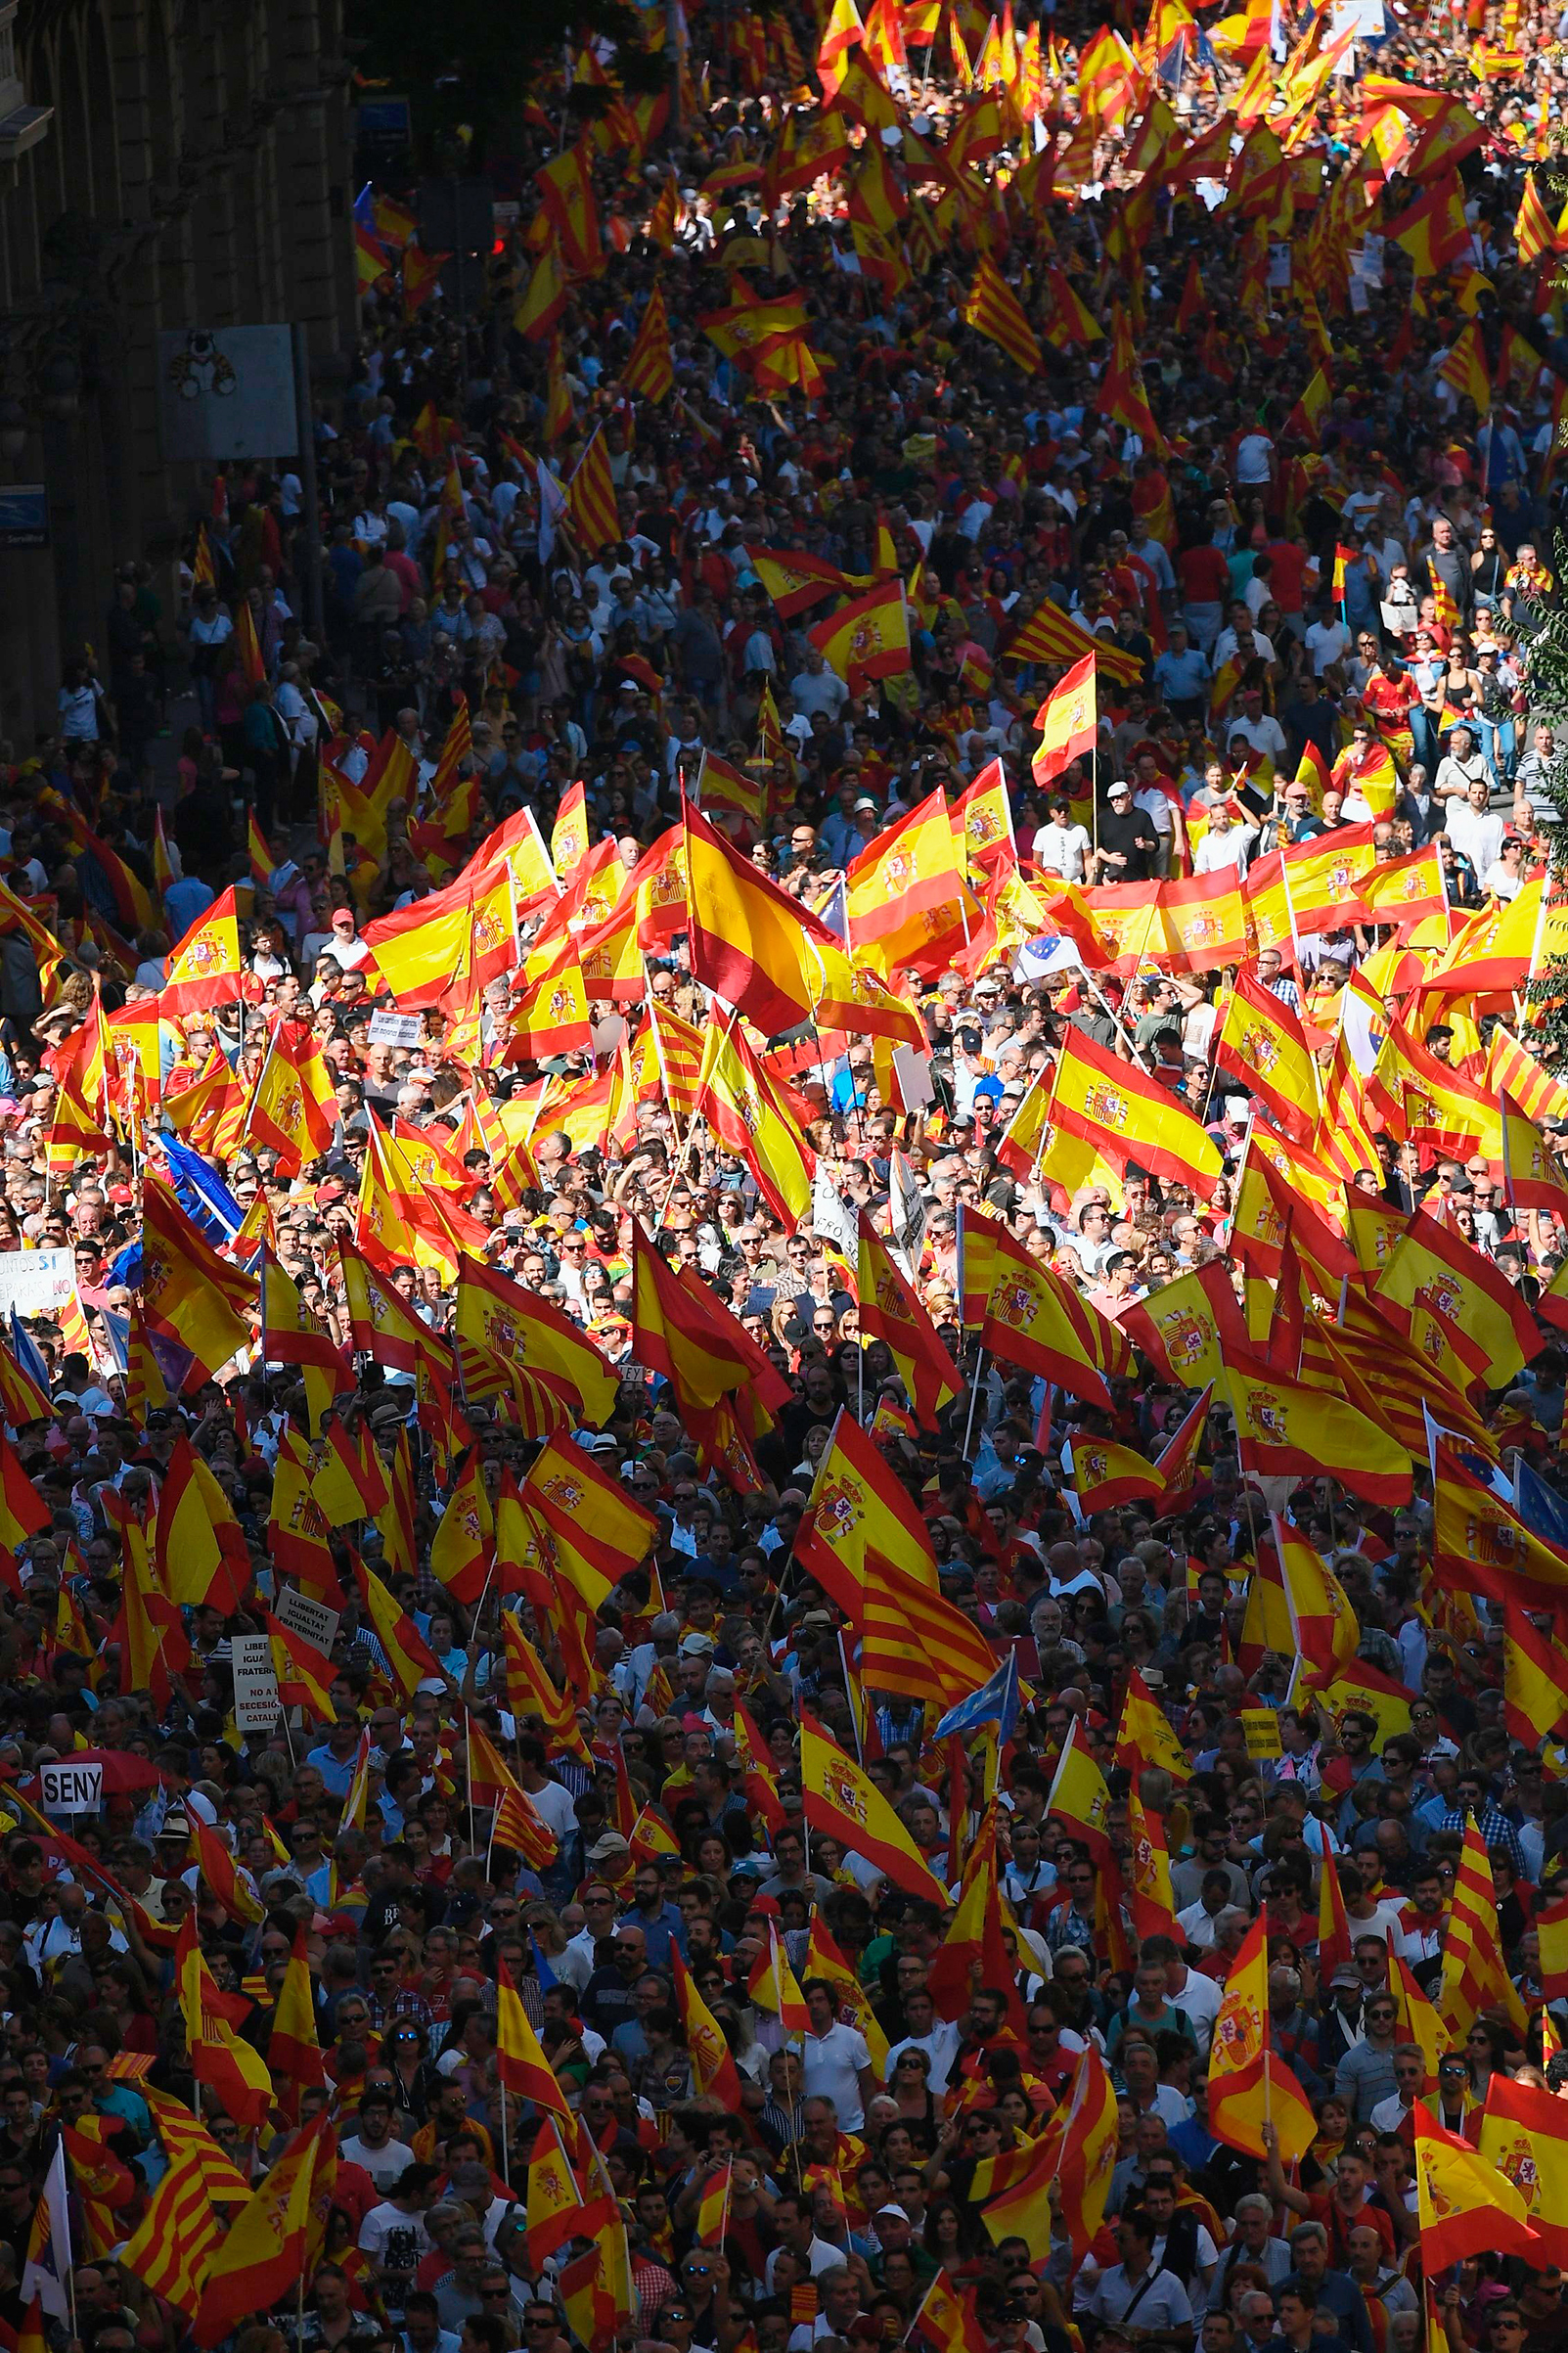 silent majority rallies in opposition to independence from Spain in Barcelona